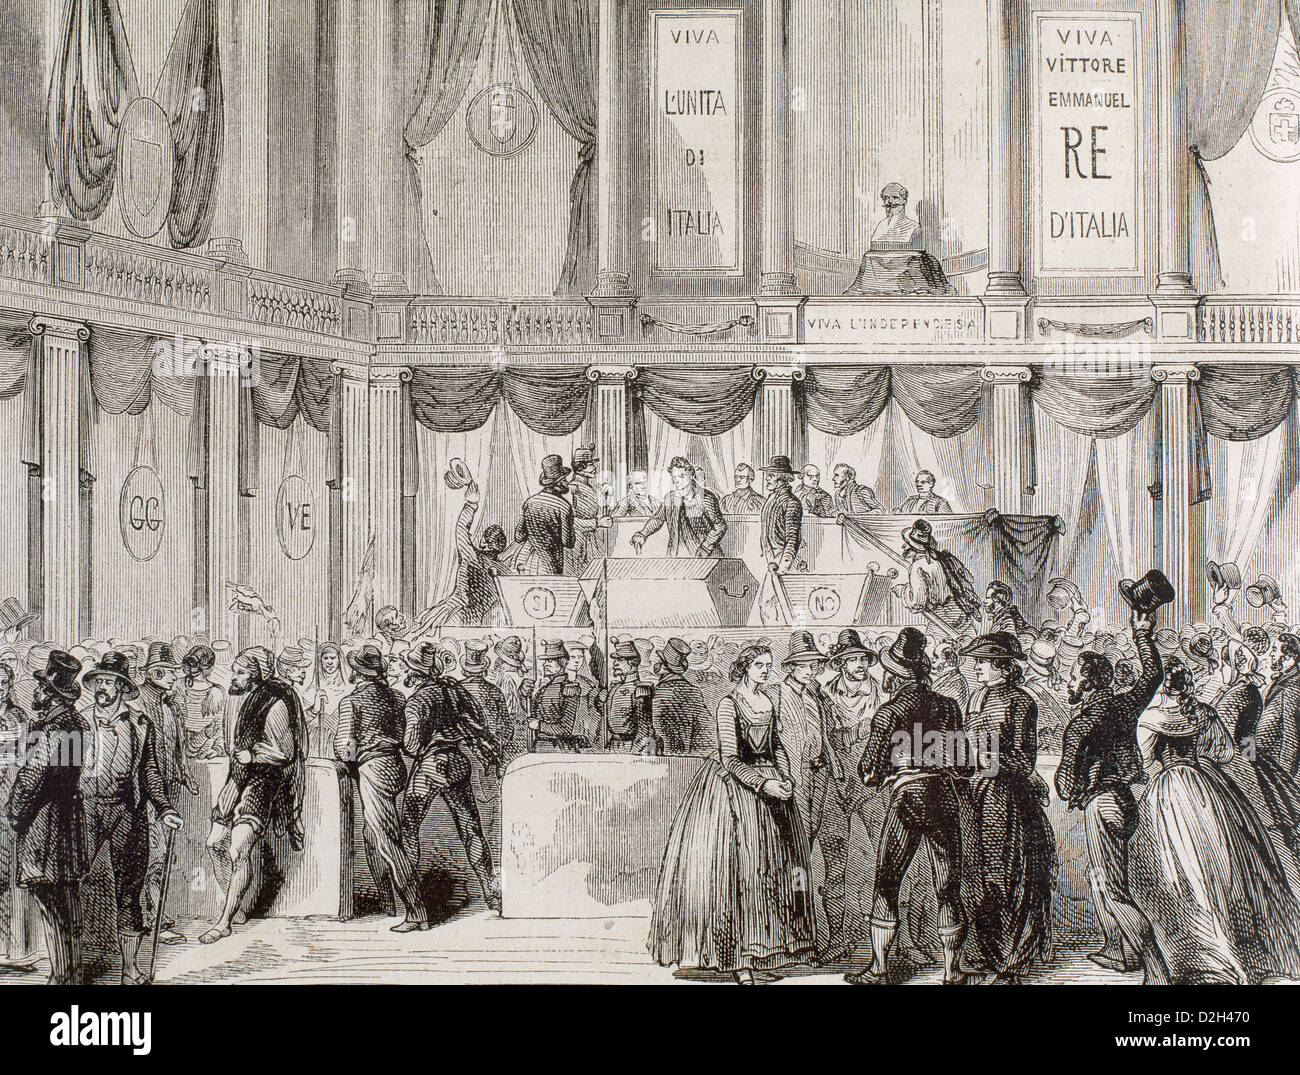 Italian Unification (1859-1924). Vote for the annexation of the Two Sicilies kingdom to the Italy Kingdom. Engraving. Stock Photo